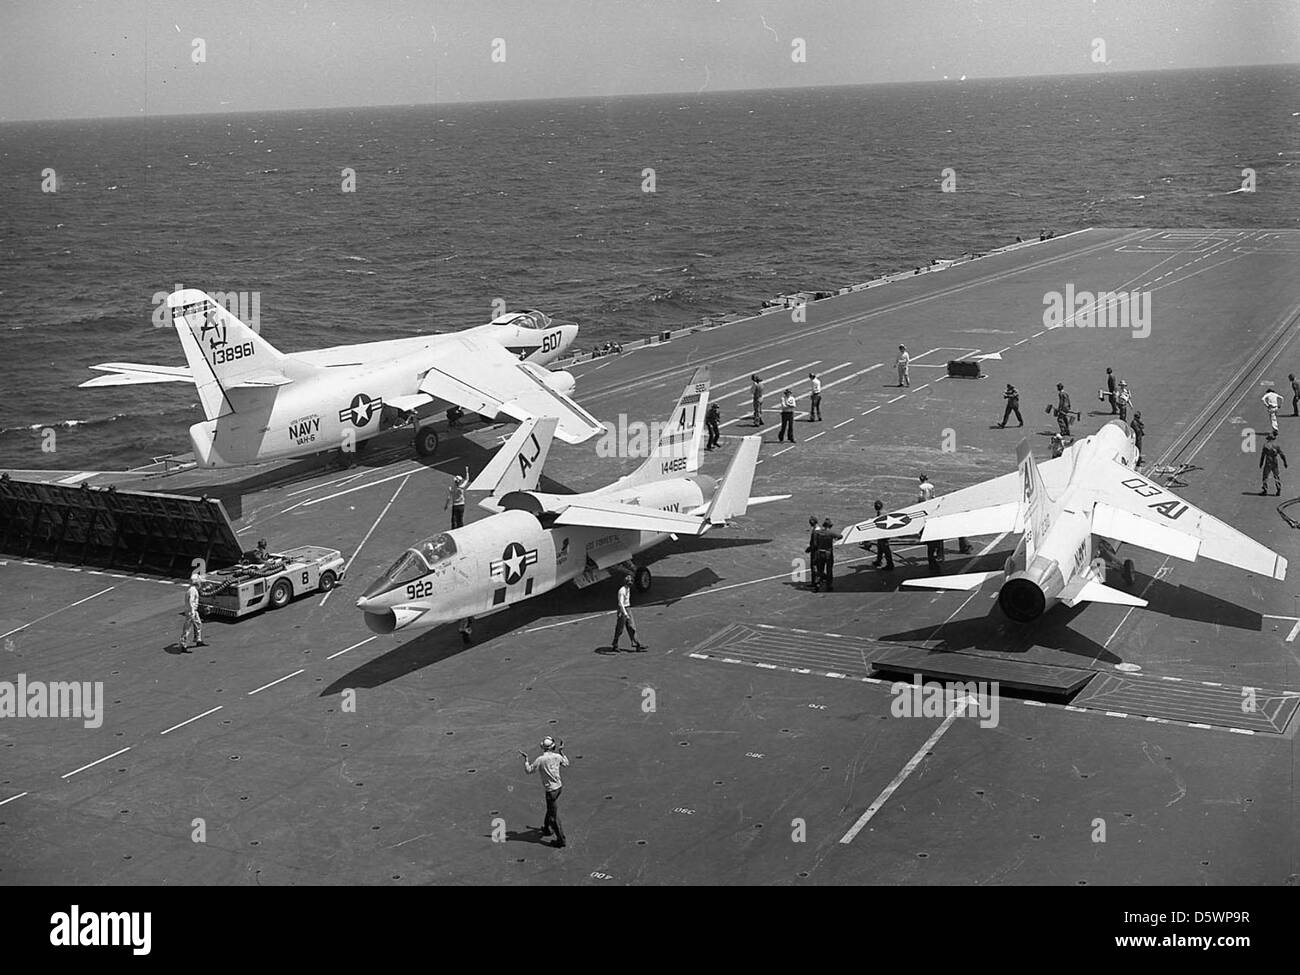 Aircraft of (CVA-8). Douglas A-3B 'Skywarrior' of VAH-6 'Fleurs' with a Vought RF-8A 'Crusader' of VFP-62, Det.59 'Fighting Photos' and on the starboard catapult is a Vought F-8E 'Crusader' of VF-103 'Sluggers' aboard the USS FORRESTAL (CVA-59). Stock Photo